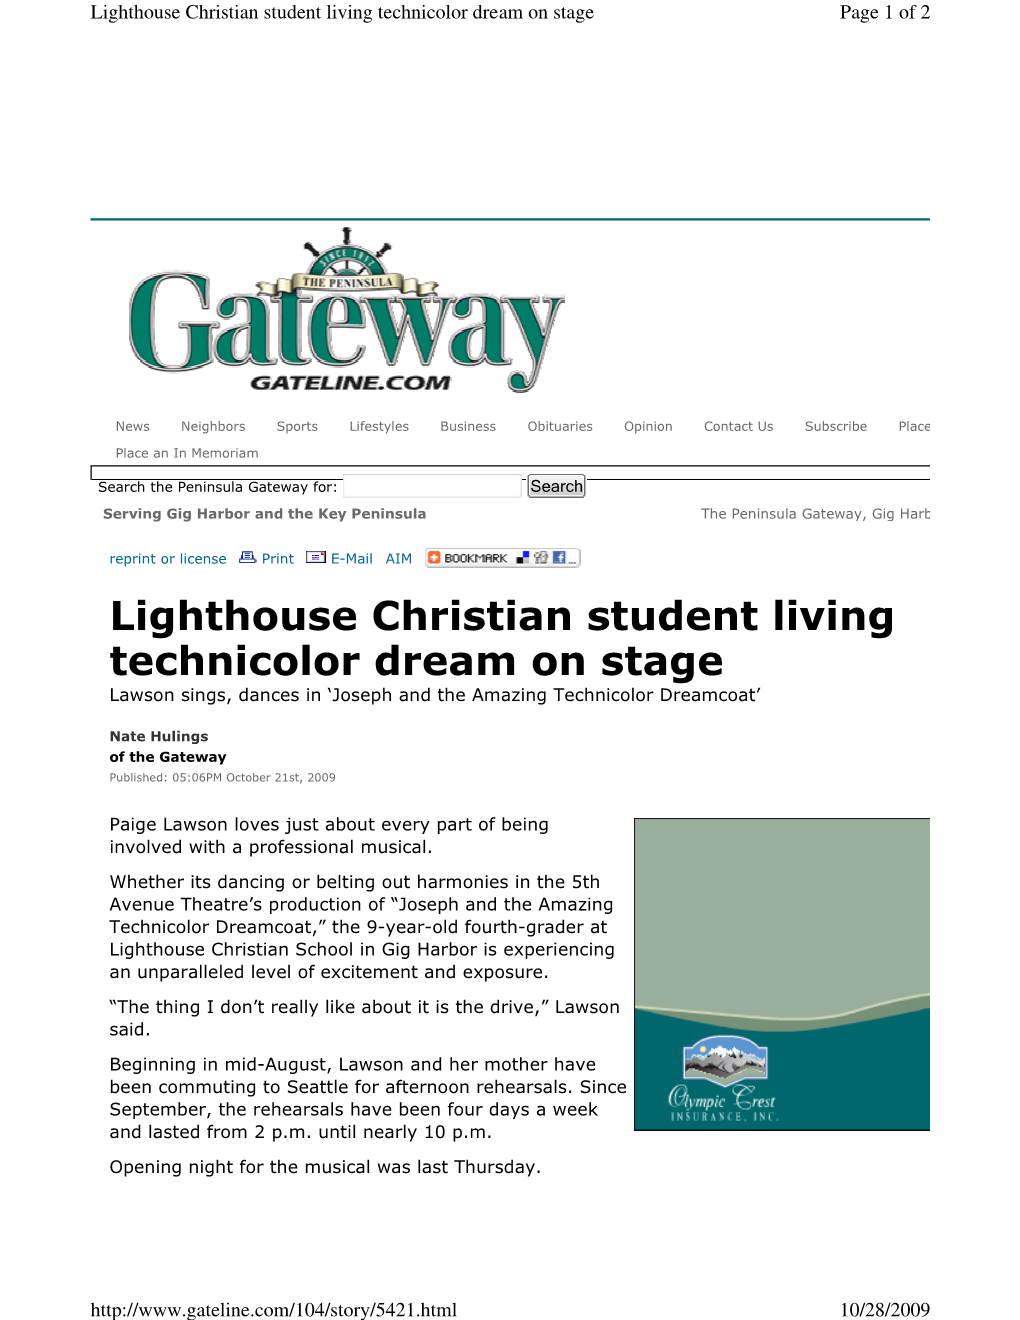 Lighthouse Christian Student Living Technicolor Dream on Stage Page 1 of 2